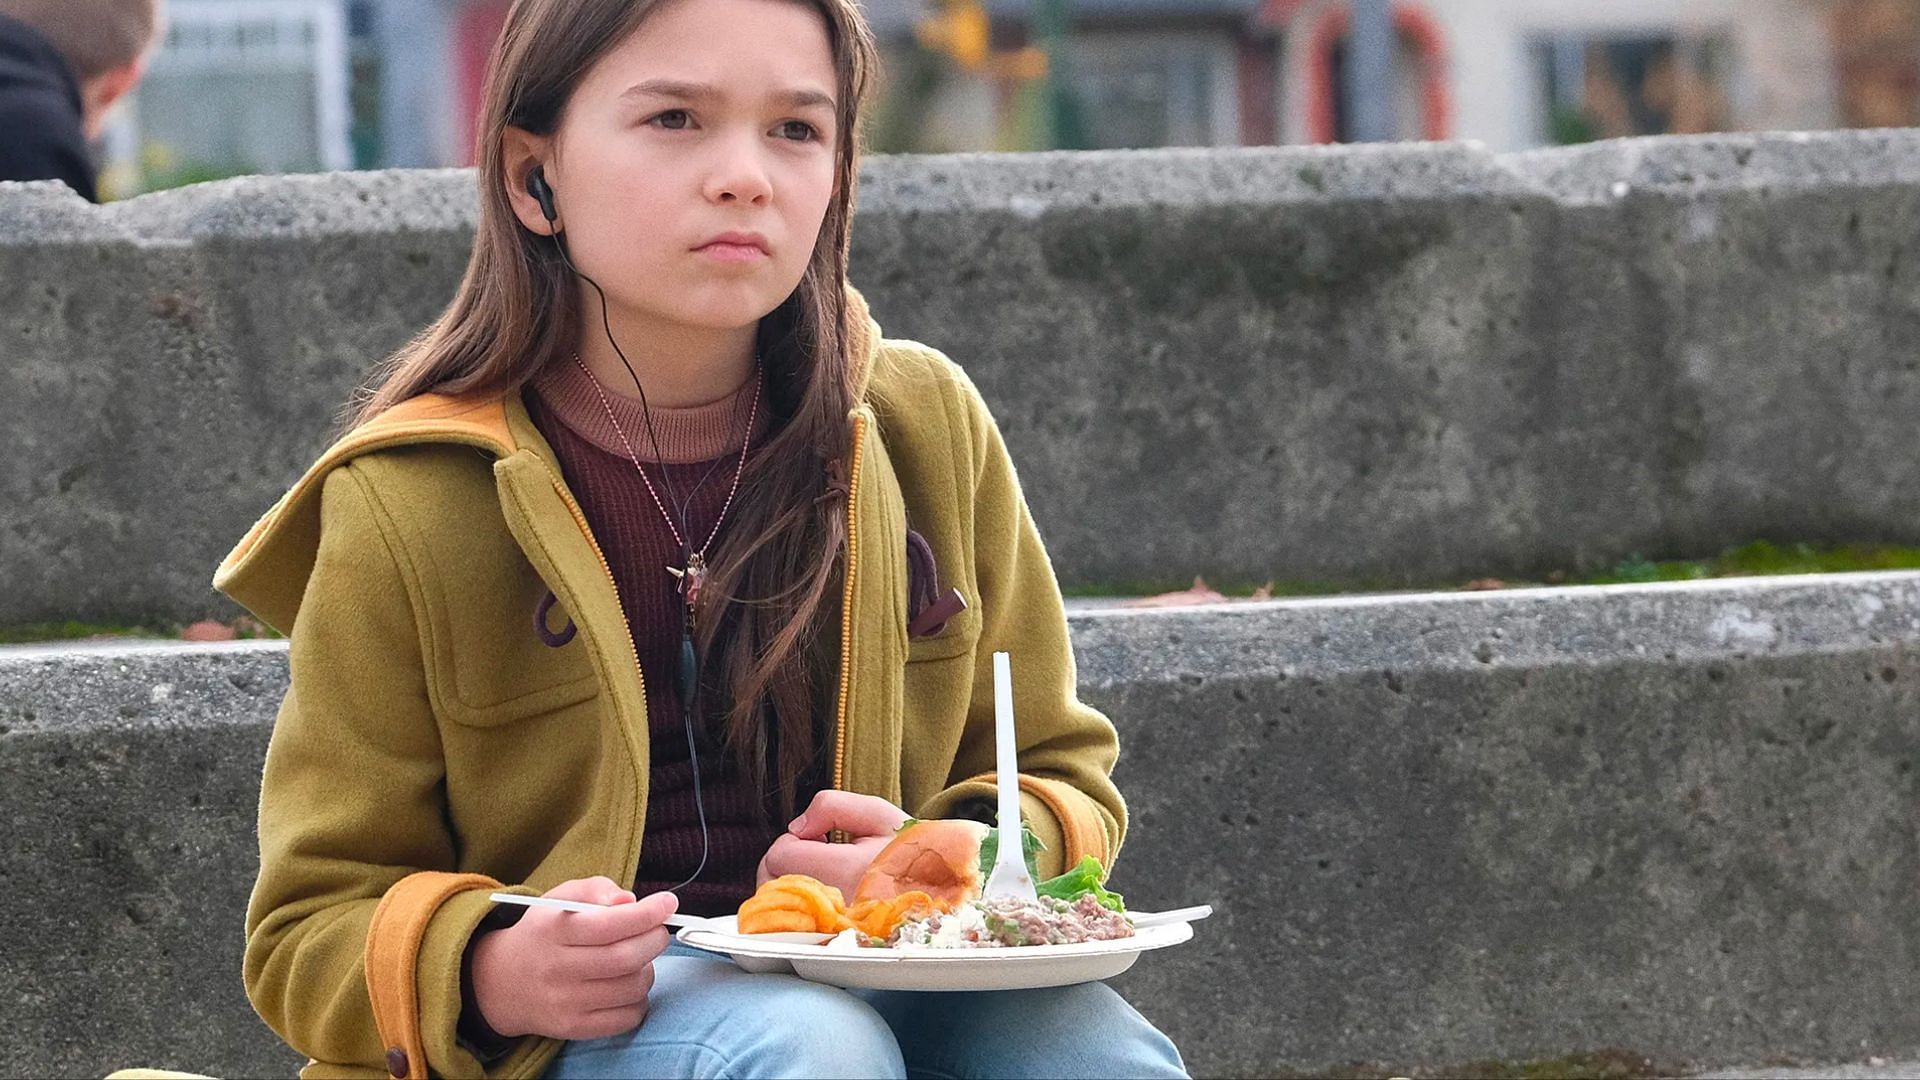 Home Before Dark- Lead played by Brooklynn Prince (Image Via TV Guide)